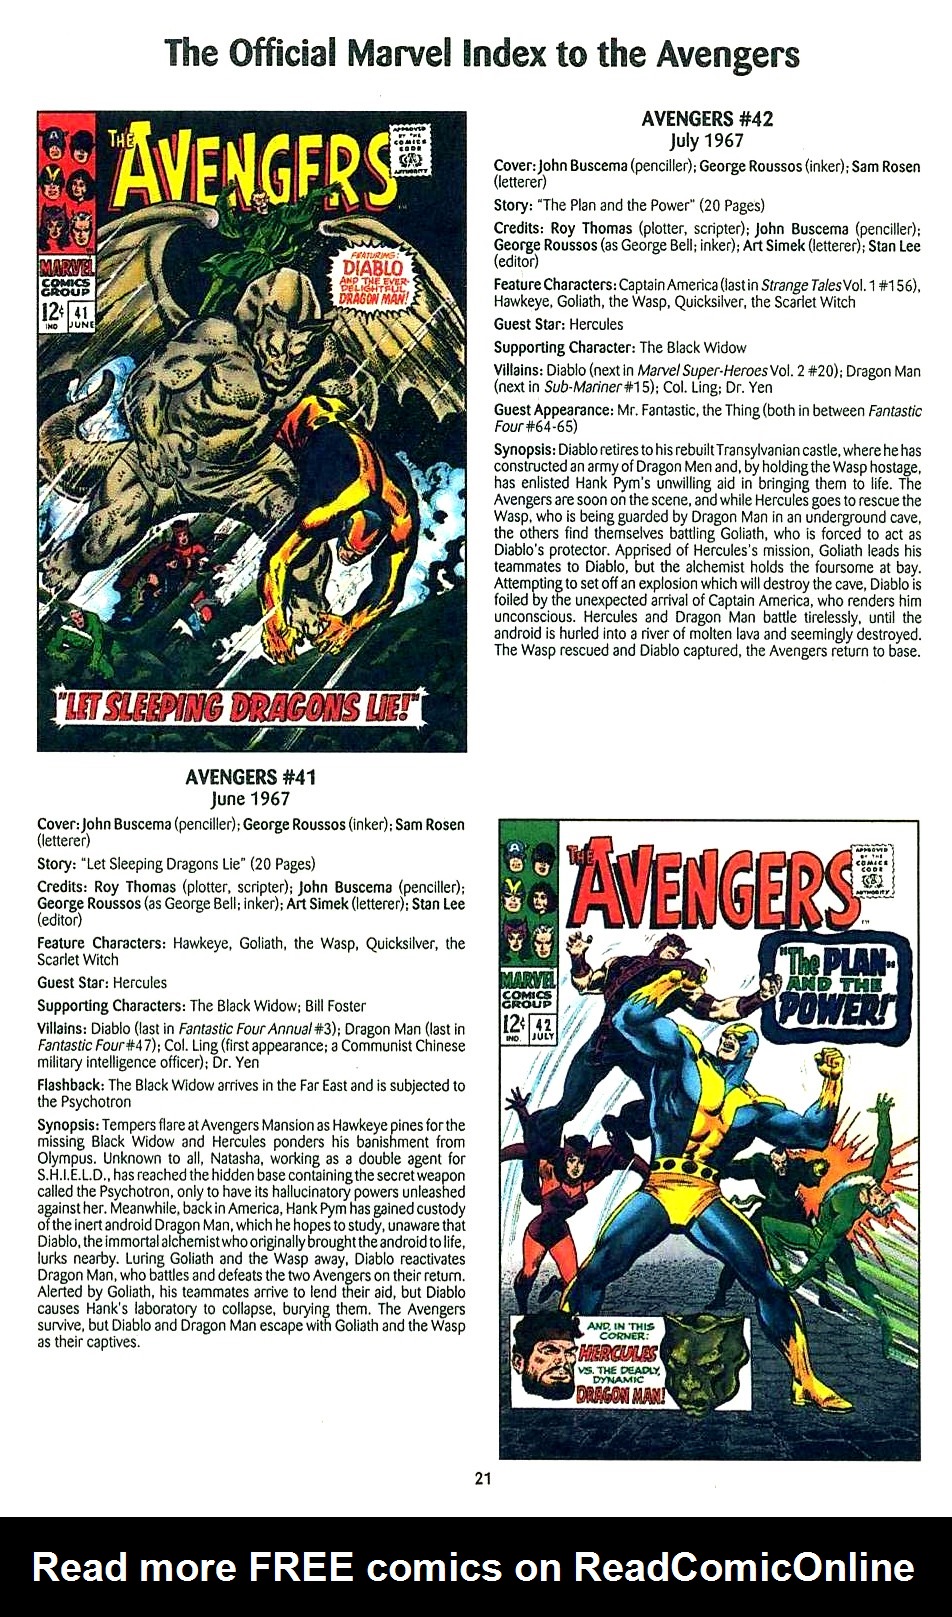 Read online The Official Marvel Index to the Avengers comic -  Issue #1 - 23